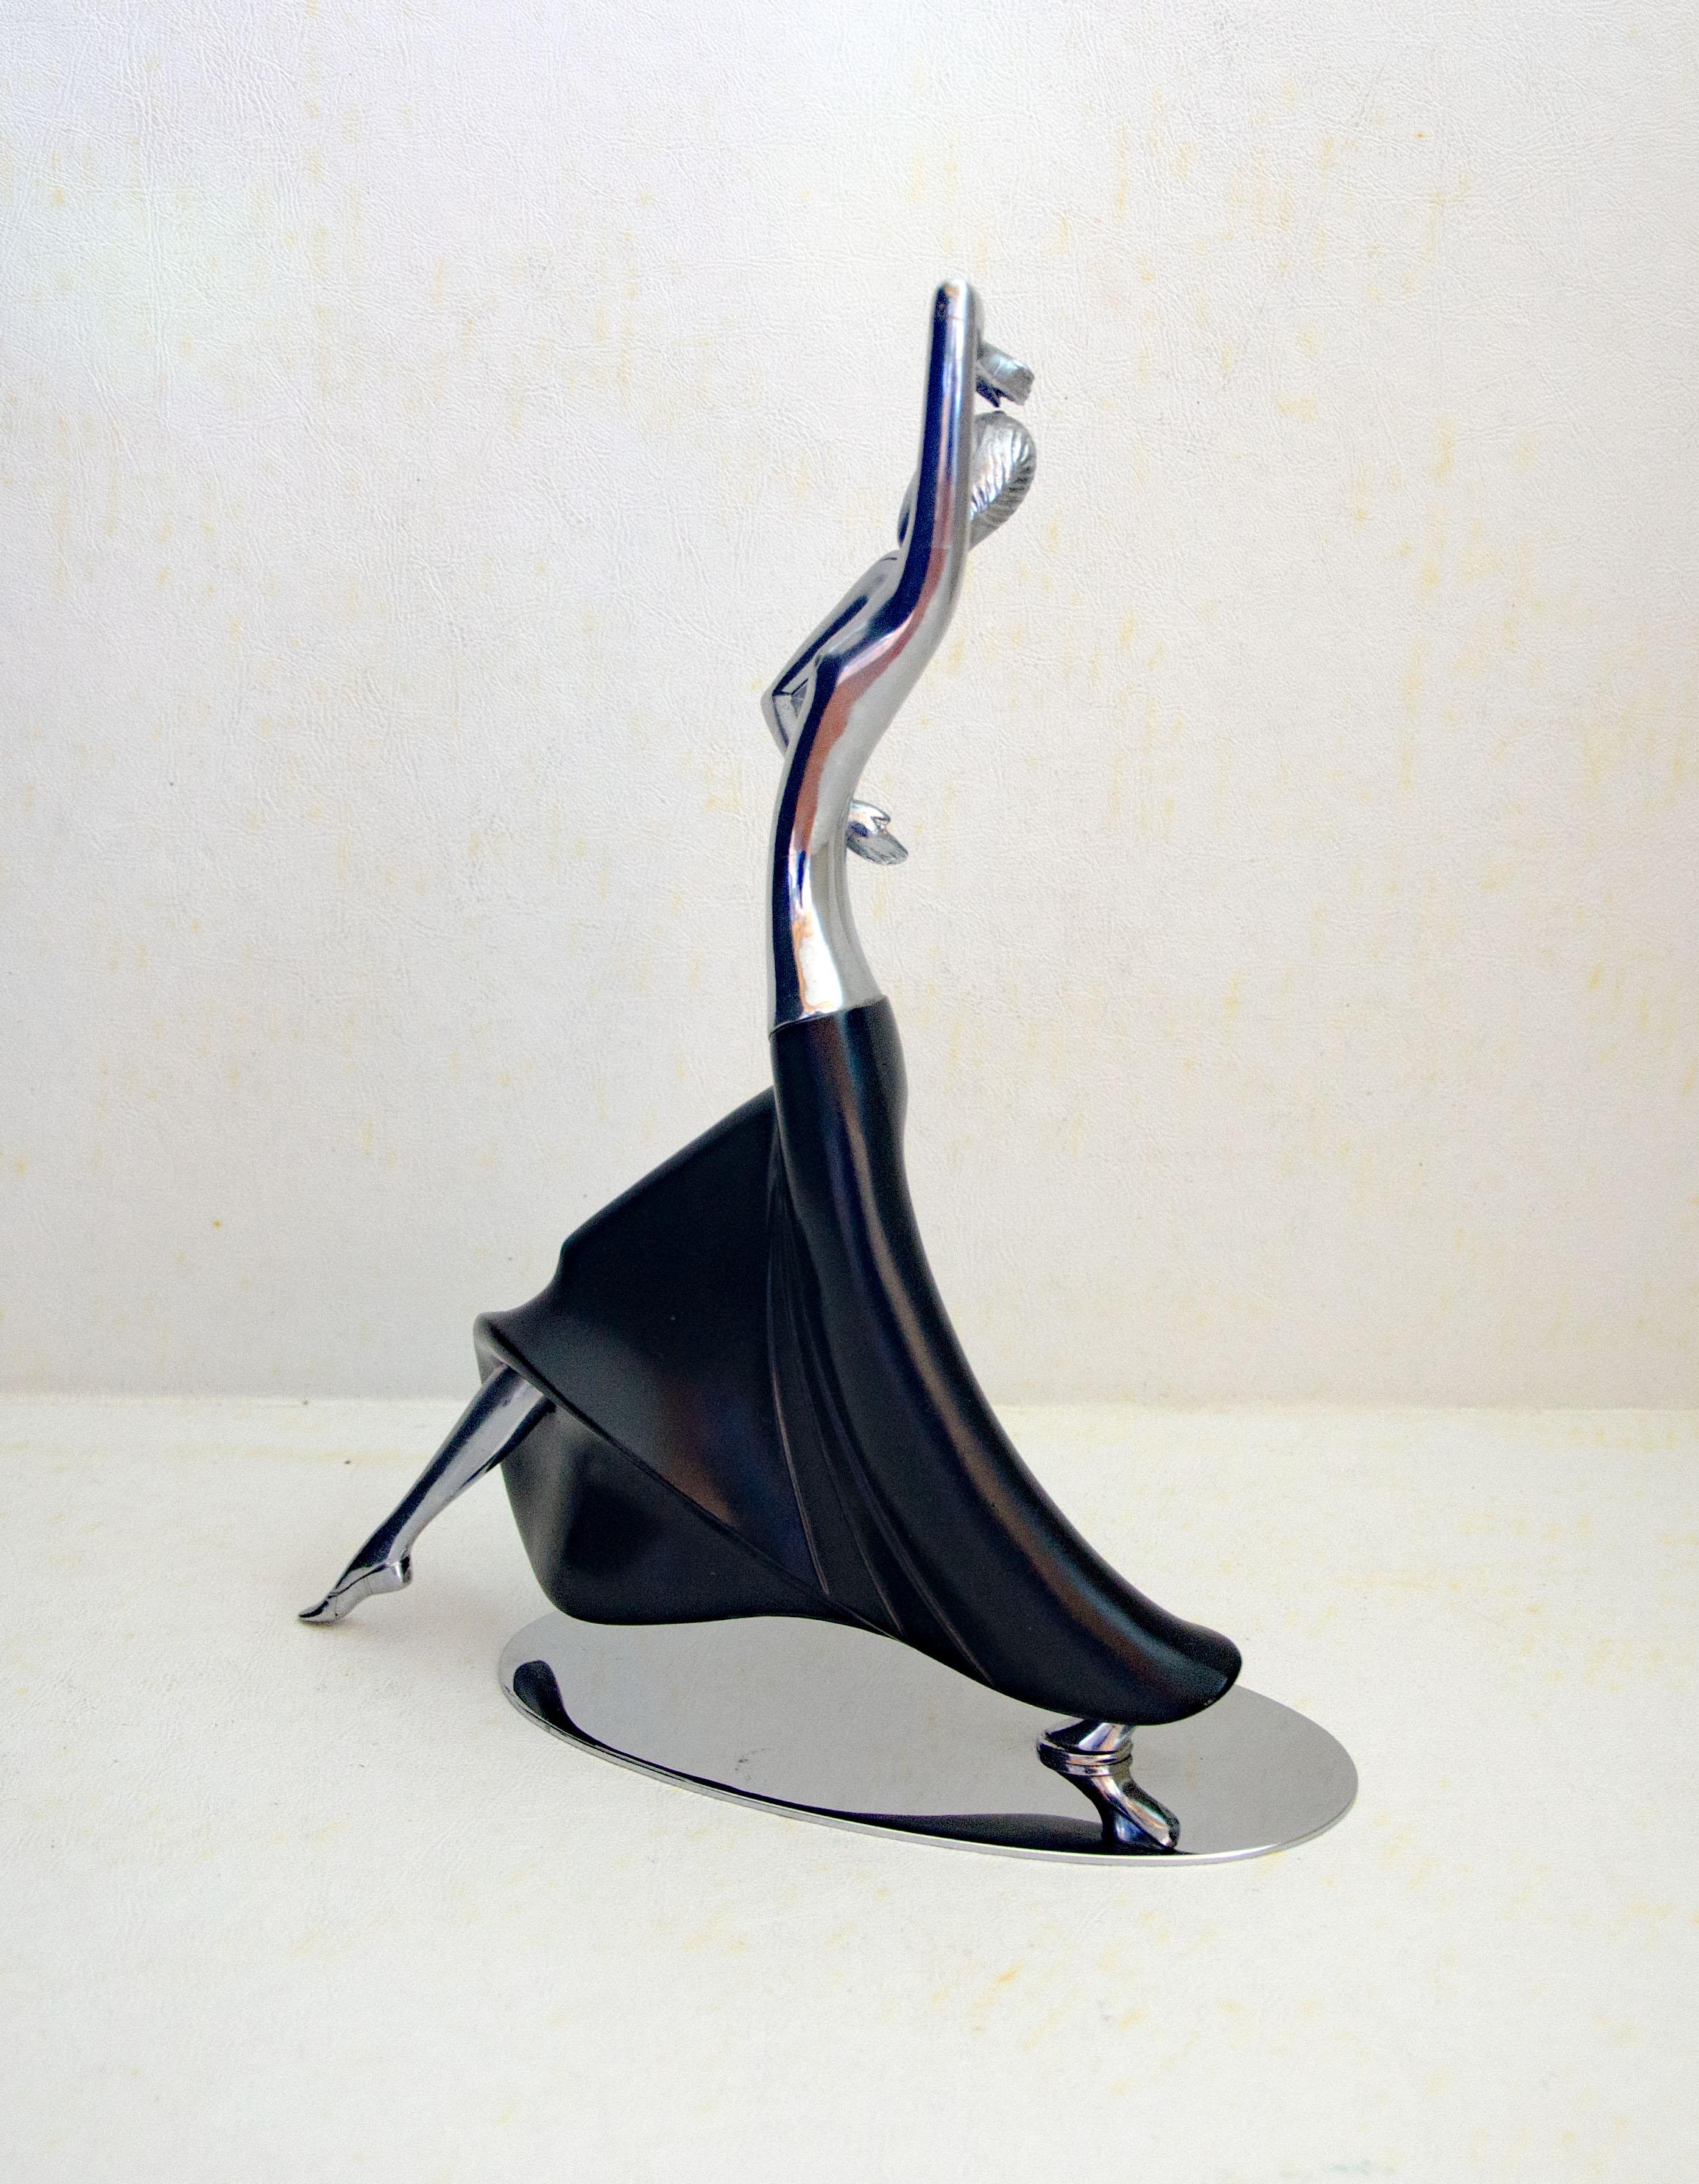 Beautiful non-ferrous sculpture of a semi-nude dancing female. The figurine is as heavy as brass or bronze, only the oval chrome-plated base is magnetic. The sculpture has a very sensuous appearance with a nude upper body and a flowing painted metal